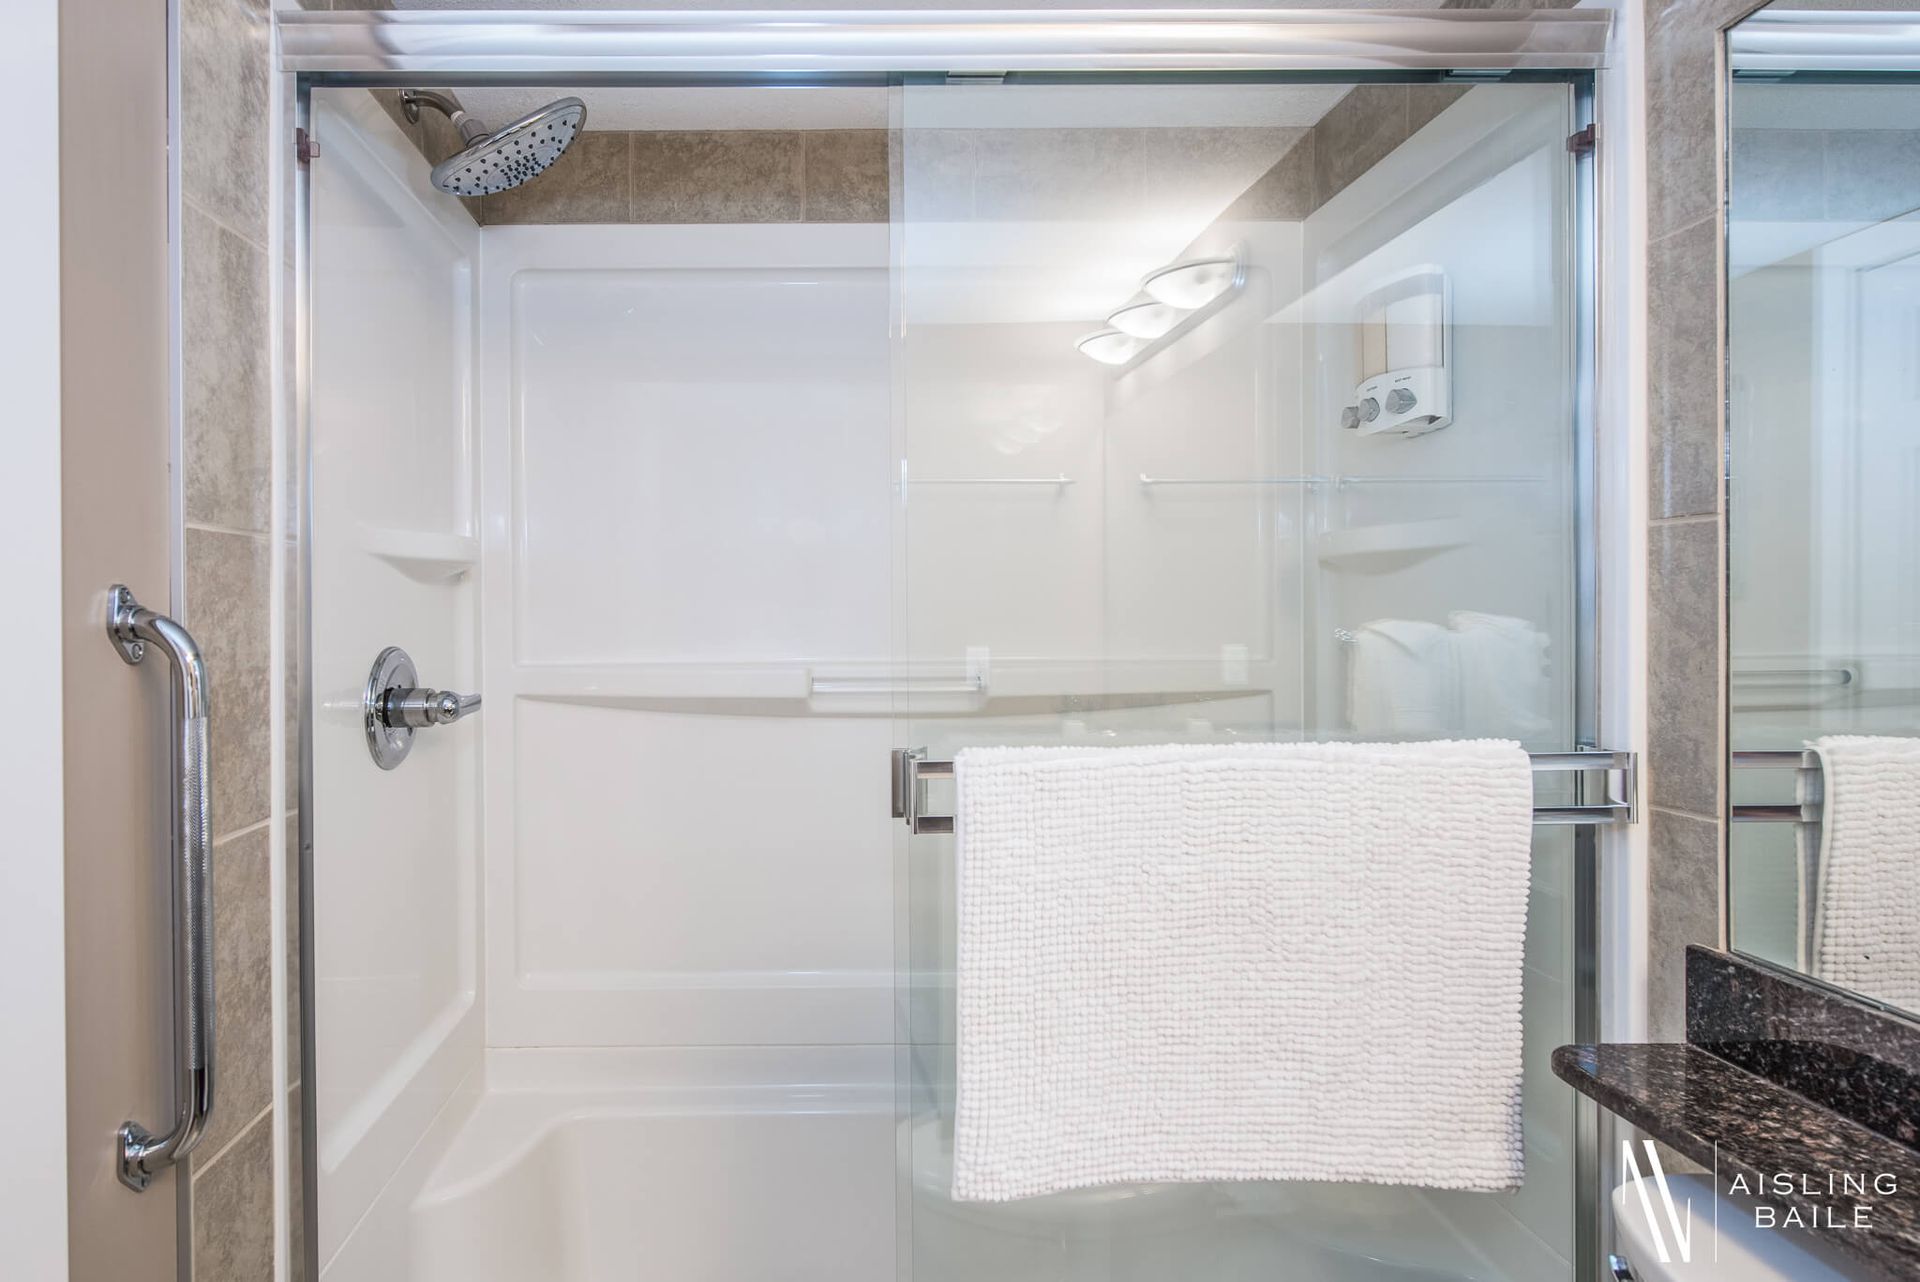 Glass shower door in the full bathroom of the Stylish condo of Lake Windermere Pointe in Invermere, a BC Vacation Rental hosted by Aisling Baile Property Management.